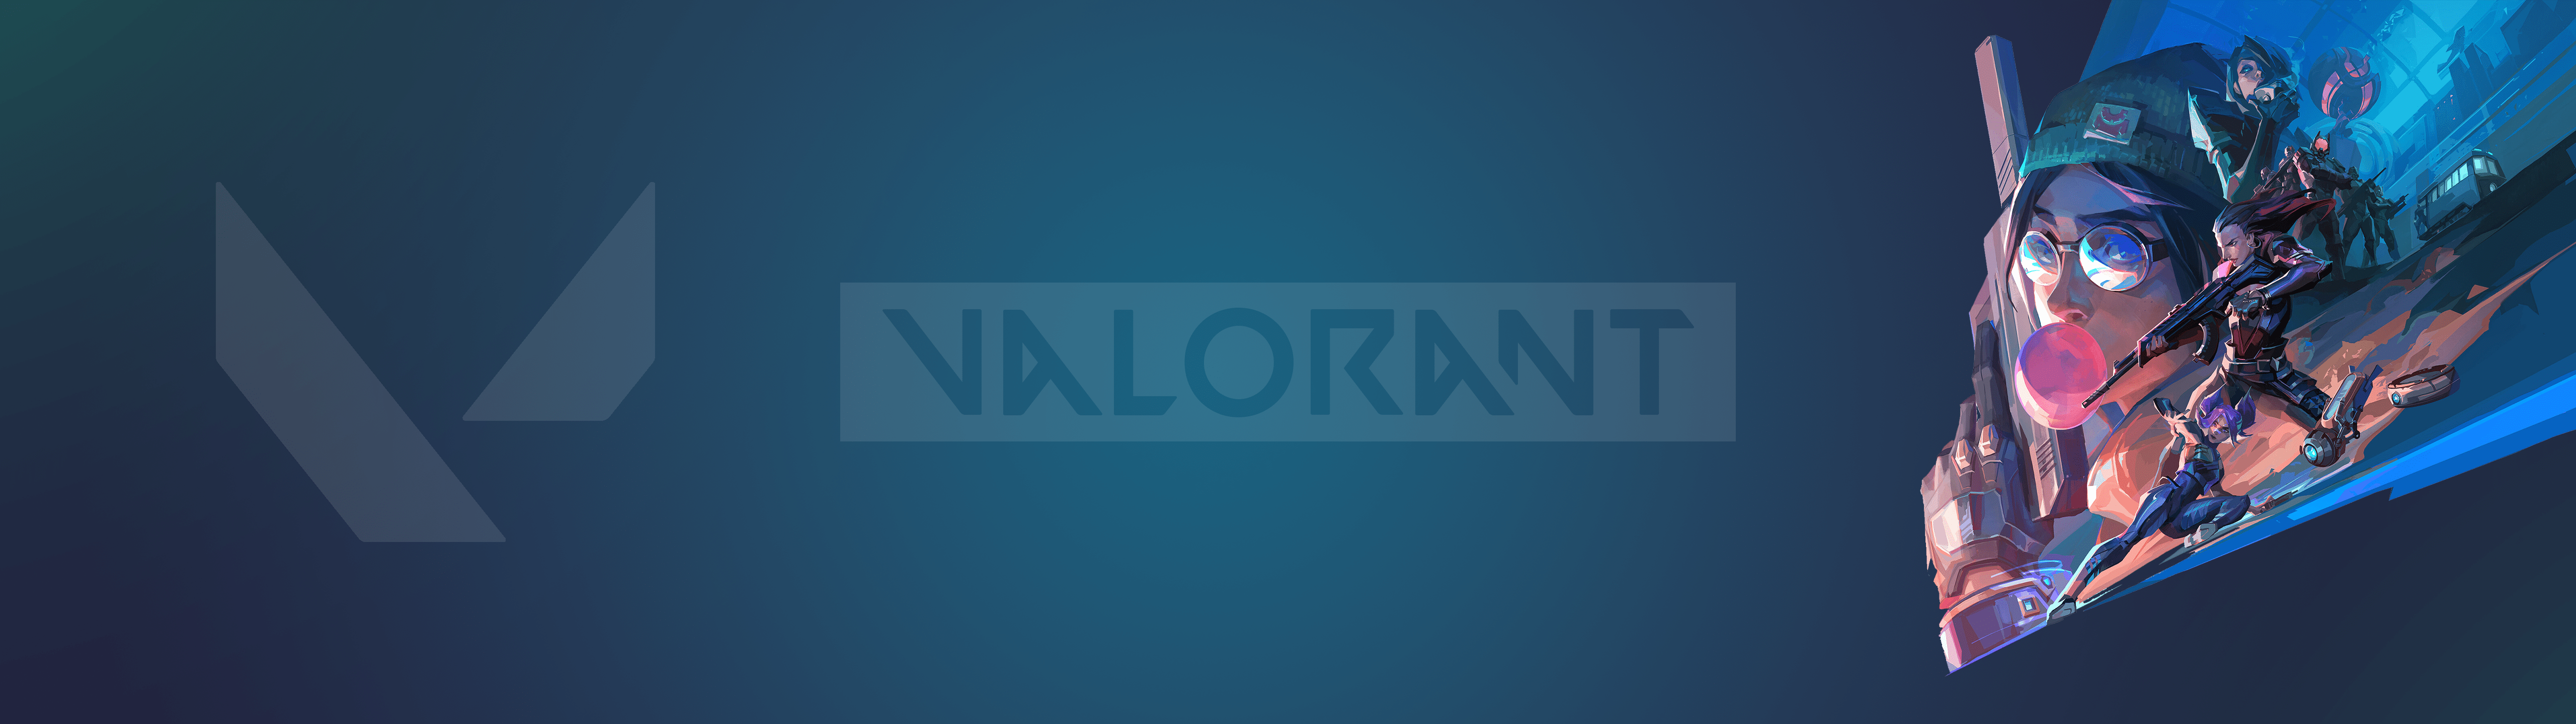 A Valorant logo wallpaper with a character in the corner - 5120x1440